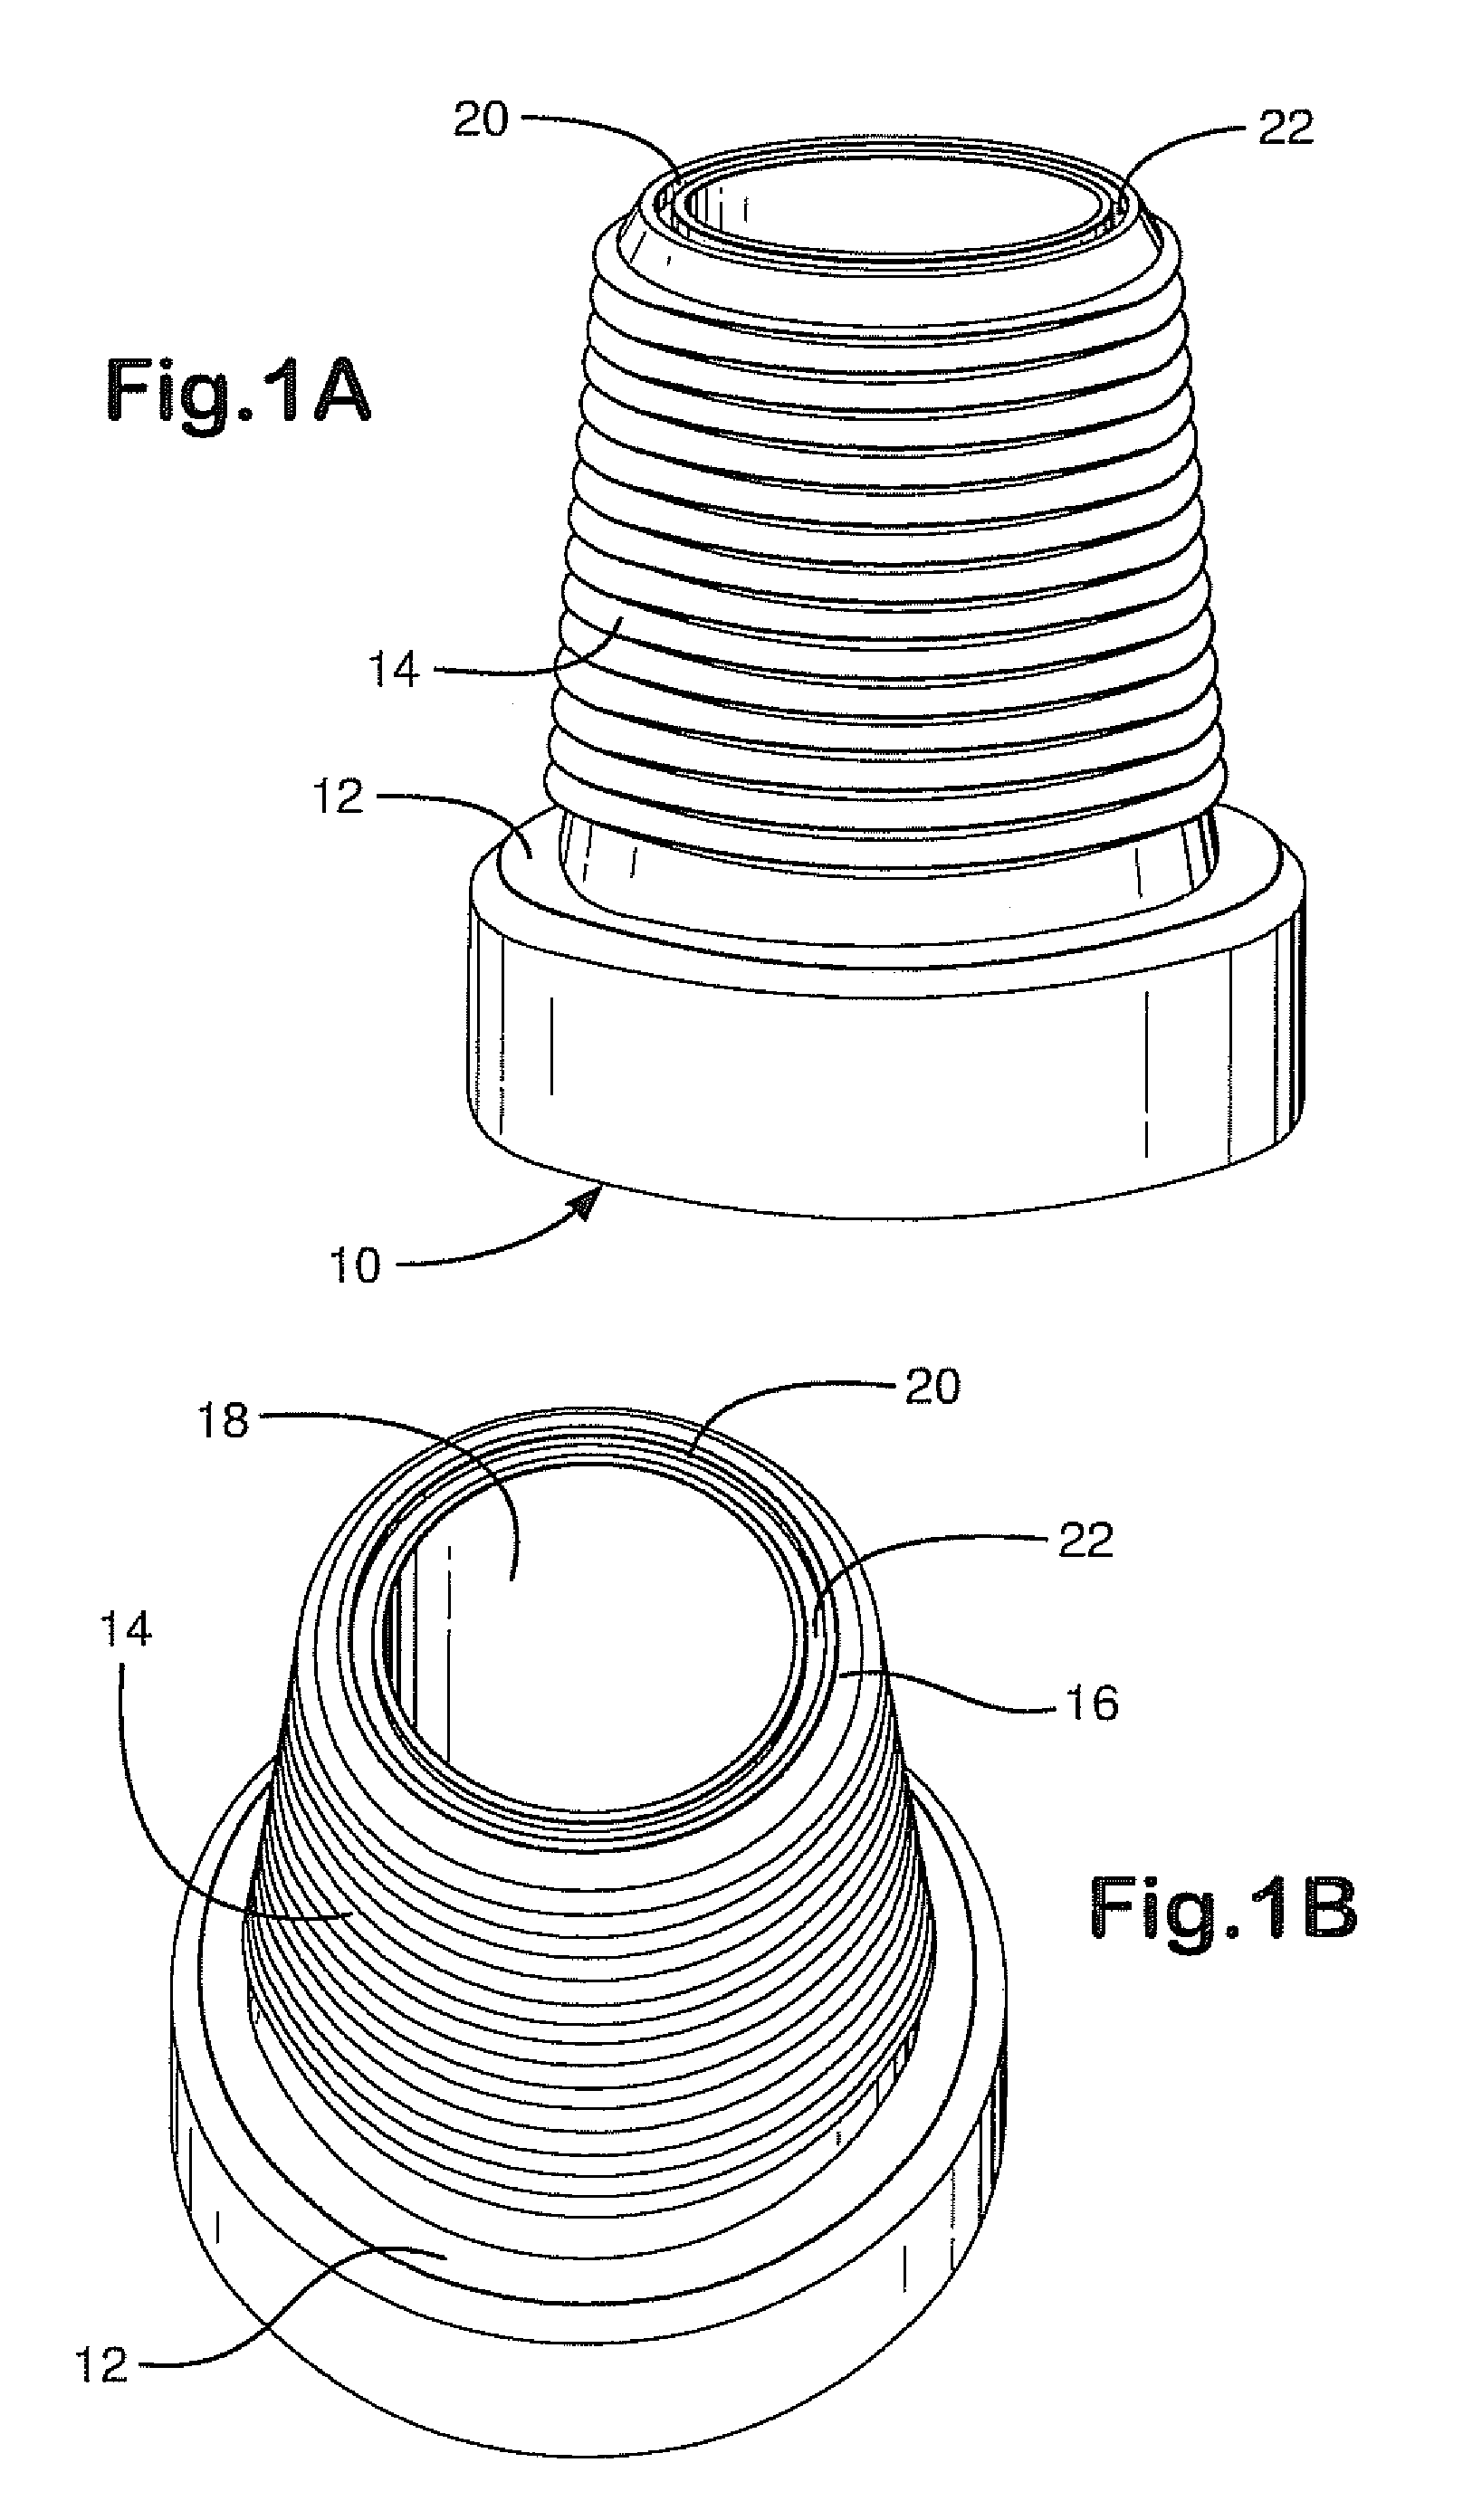 Drilling rigs with apparatus identification systems and methods